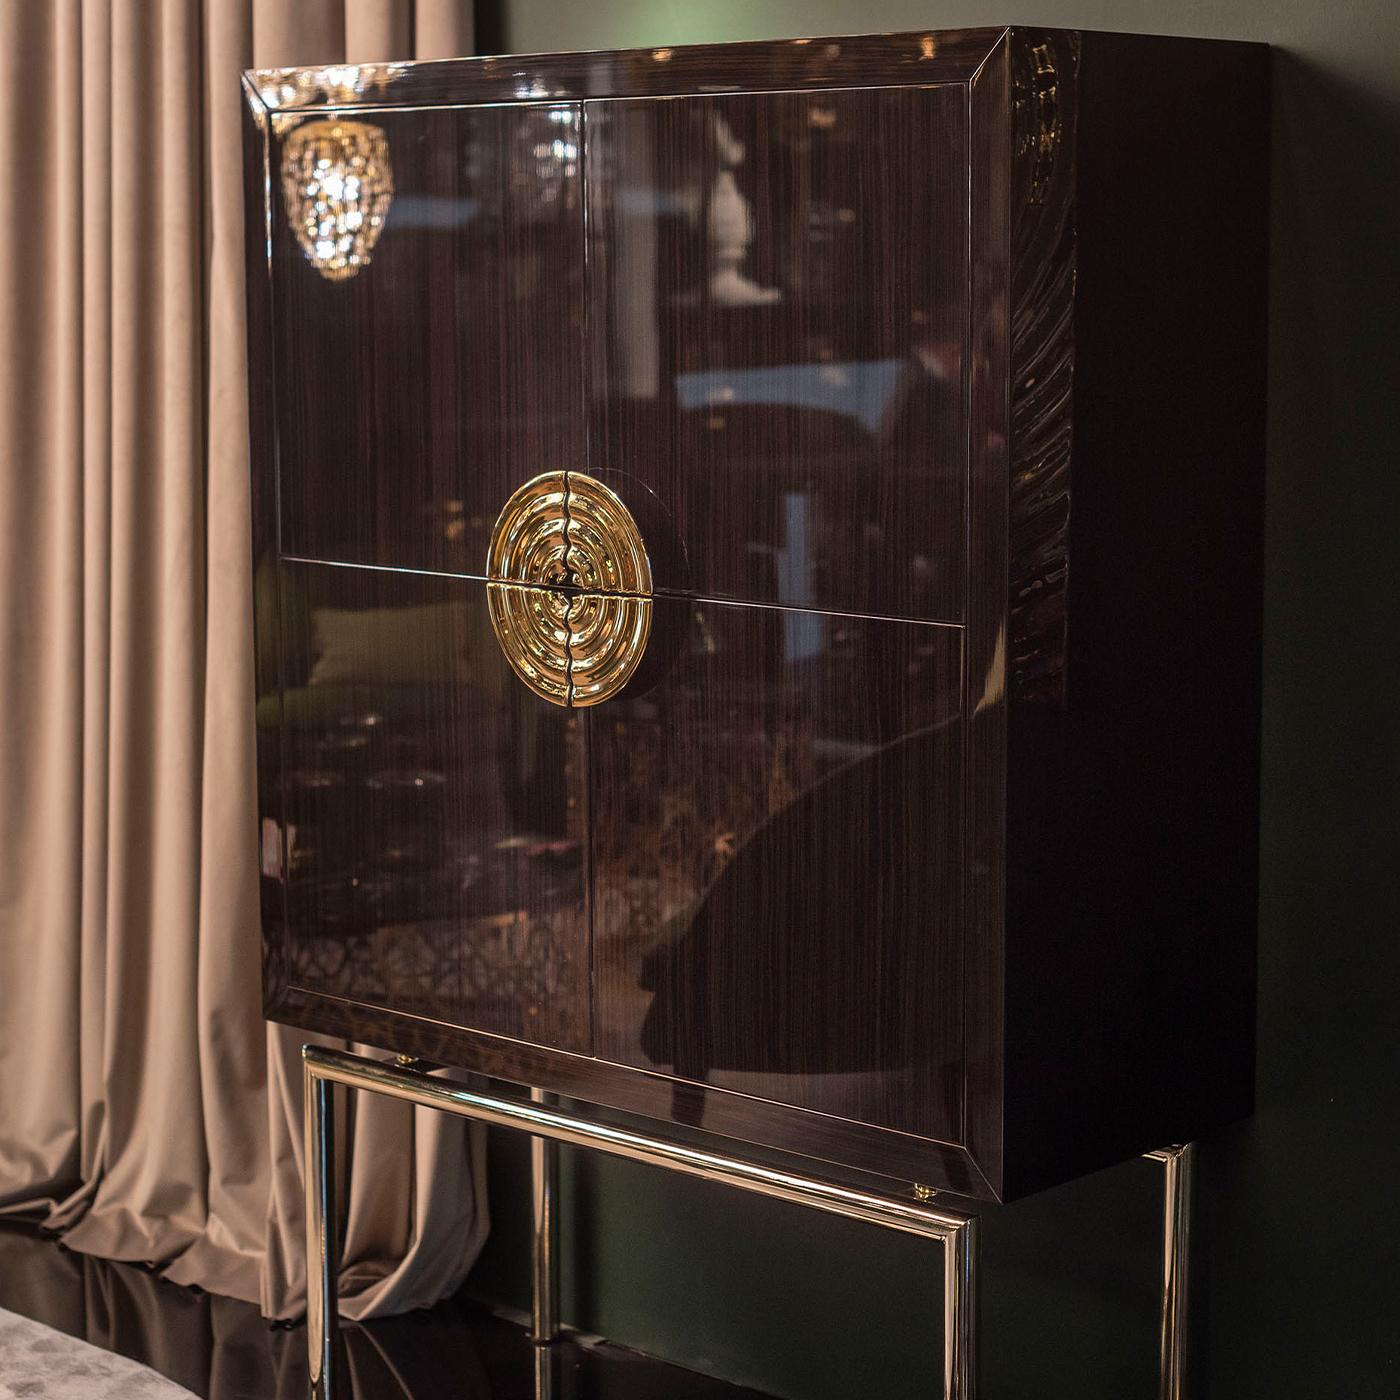 Part of the New Secret Collection, this modern 4-door cabinet offers unparalleled sophistication. Raised on a tubular metal base with a precious 24k-gold finish, the honeycomb ebony has an alluring brushed 100 Gloss finish that enhances the